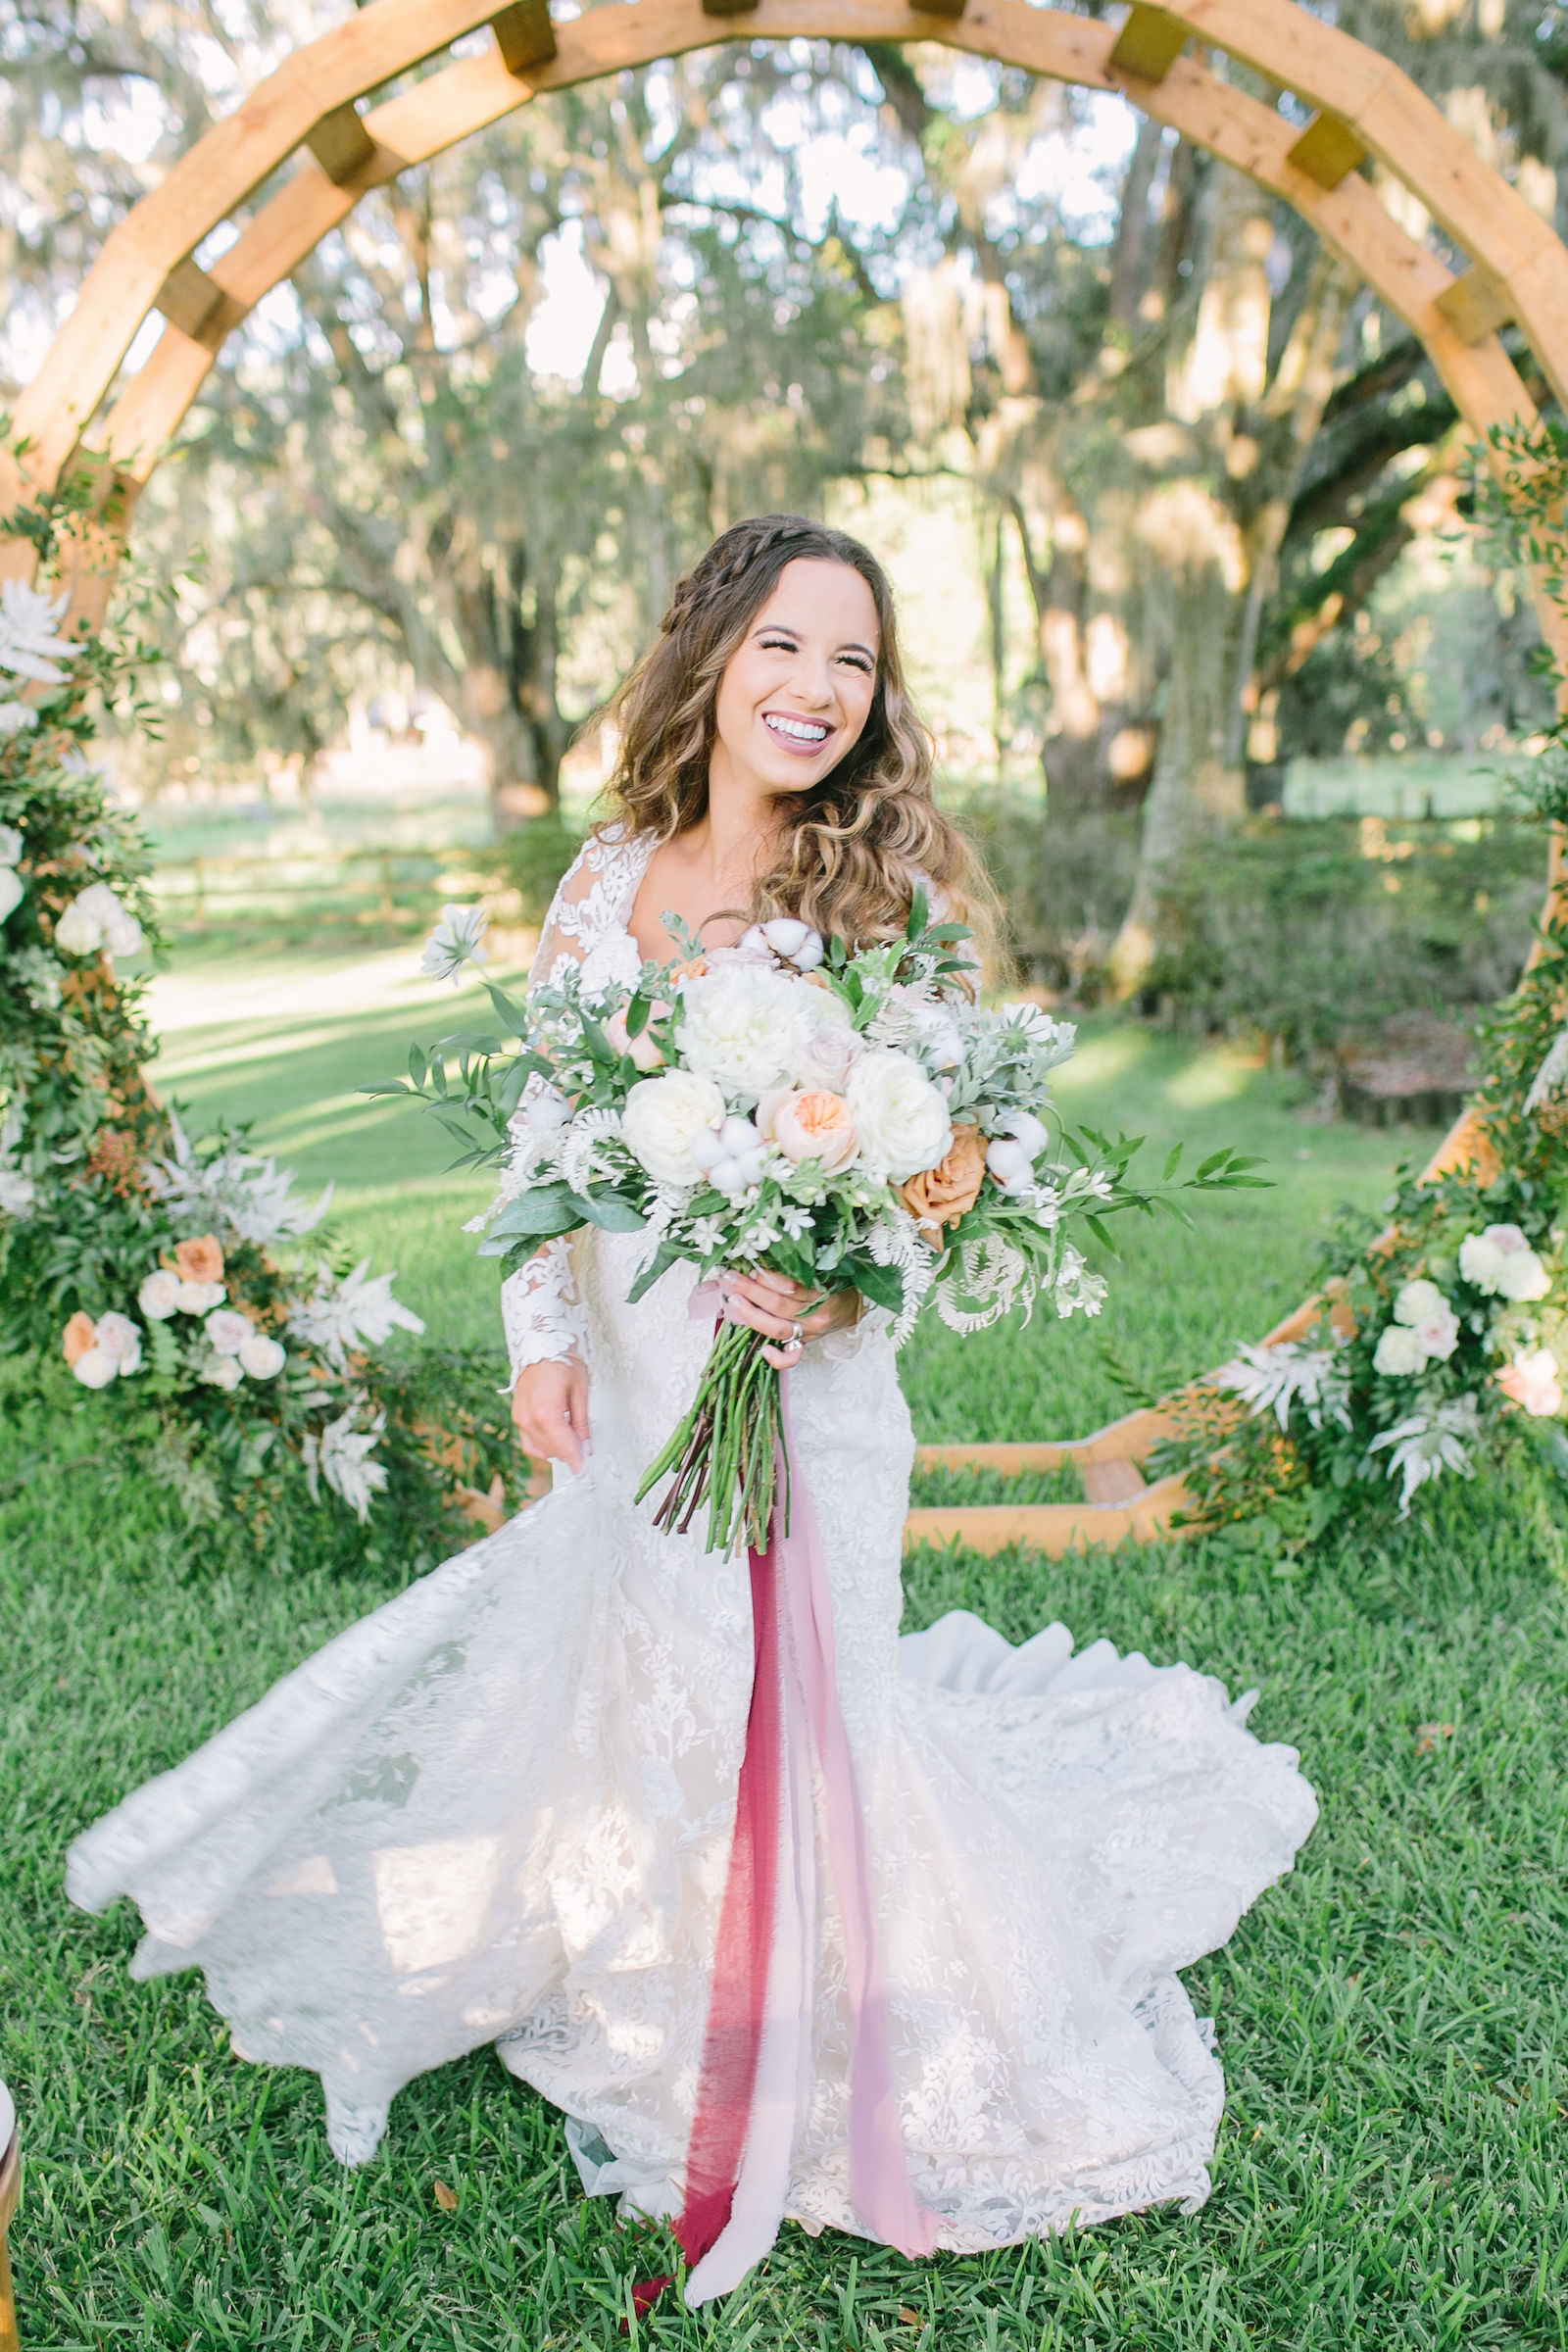 Outdoor Florida Bridal Portrait | Lace Mermaid Long Sleeve Low Back Illusion Lace Bridal Gown Wedding Dress | Ivory Champagne and Peach Natural Bouquet with Roses Astilbe and Greenery tied with Blush Pink and Mauve Ribbons | Round Wood Moon Arch Wedding Ceremony Backdrop with Natural Ivory and Peach Garland Floral Arrangements